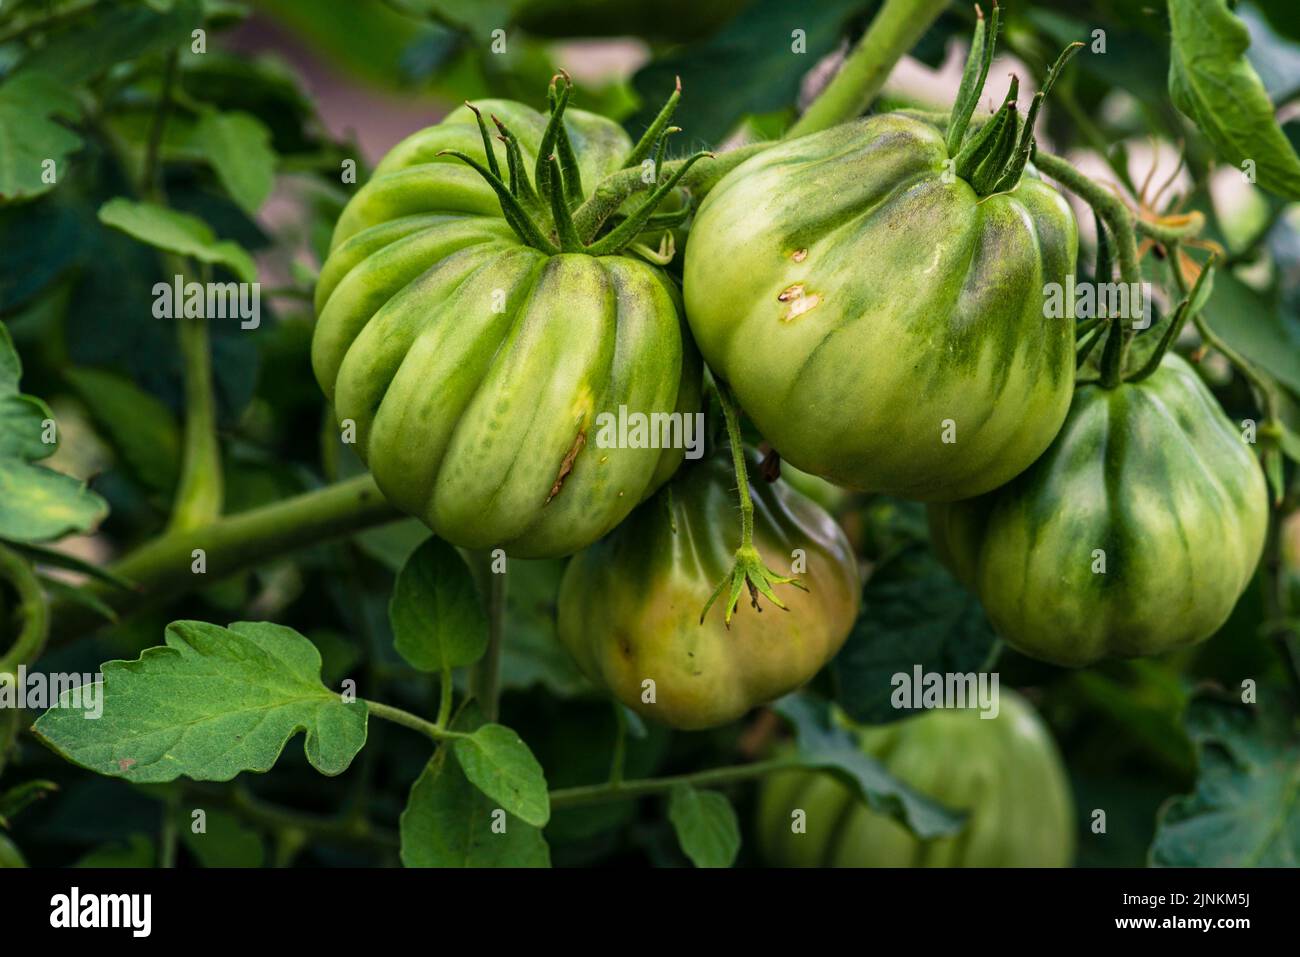 Tomato plants in greenhouse Green tomatoes plantation. Organic farming, young tomato cluster plants growth in greenhouse. concept,poster, screensaver, Stock Photo